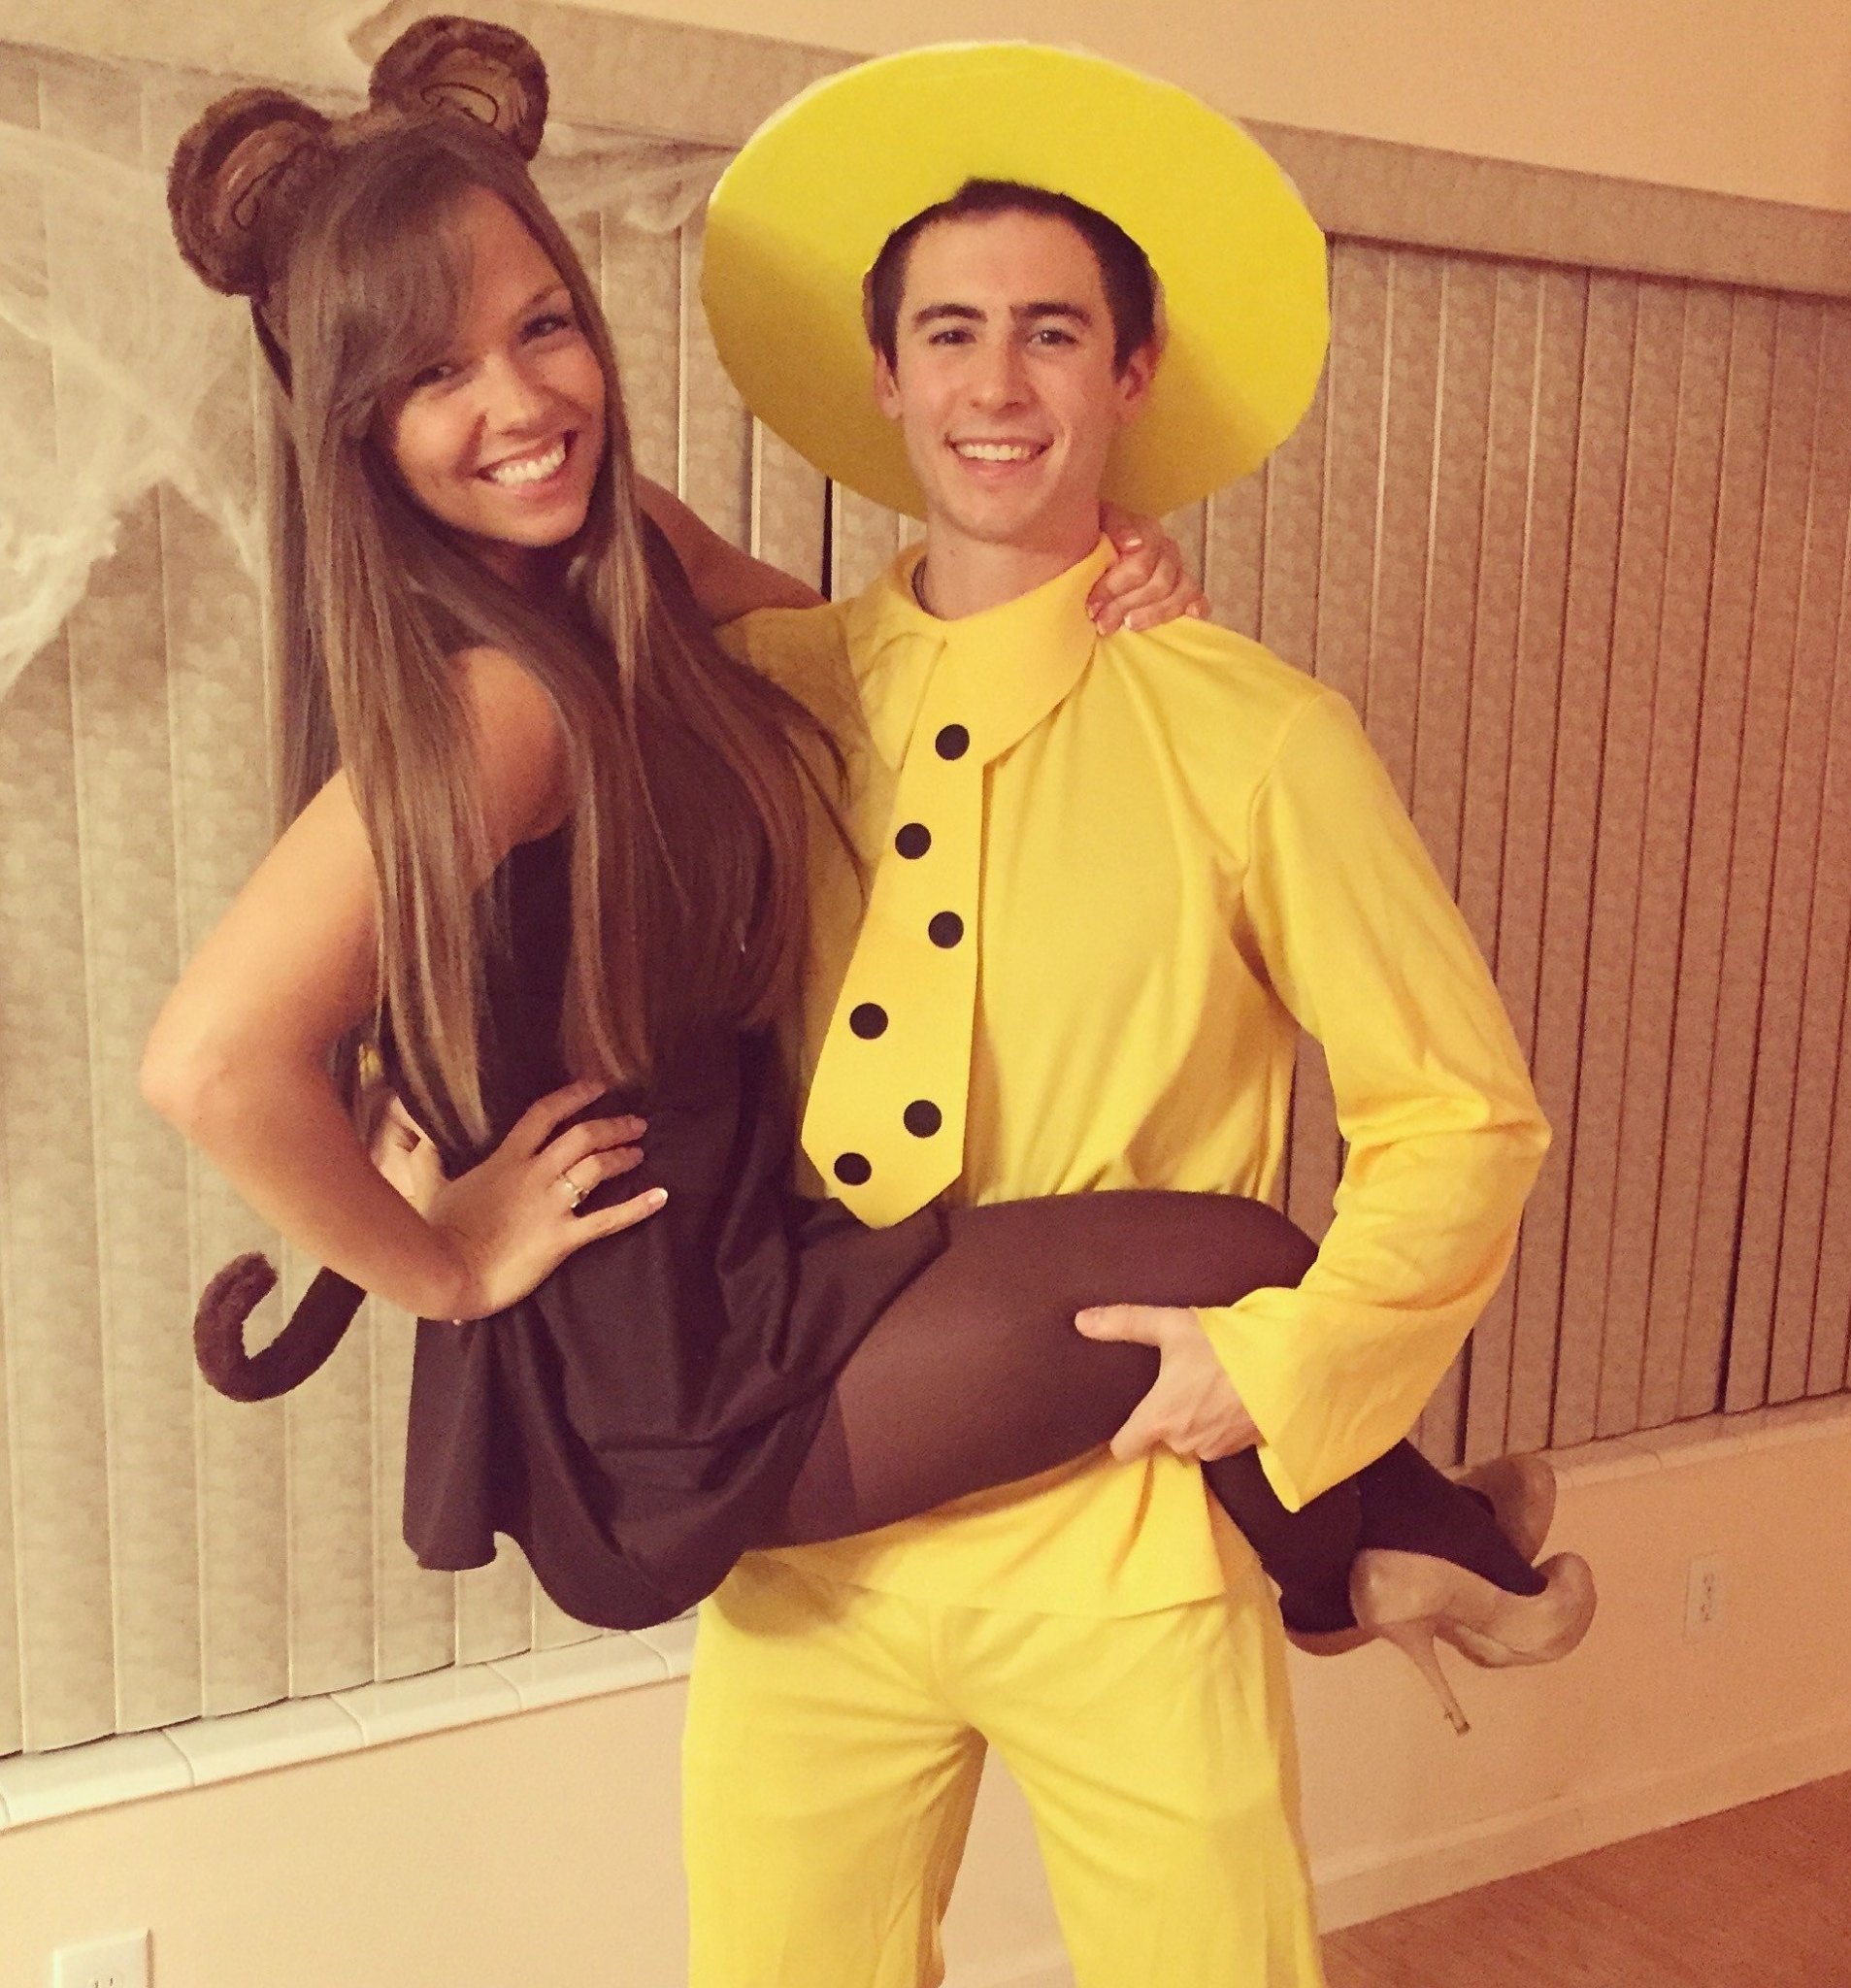 curious-george-and-the-man-in-the-yellow-hat-couple-costume-140971-e1495110992787.jpg